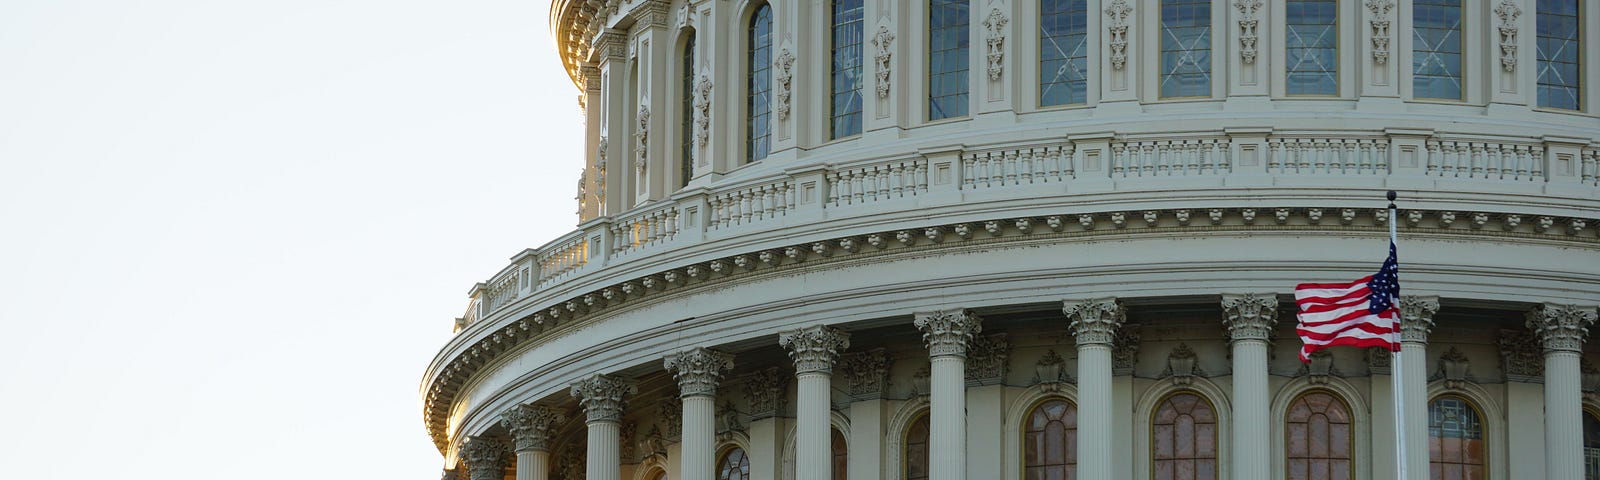 Closeup photo of the U.S. Capitol dome with an American flag foreground right.